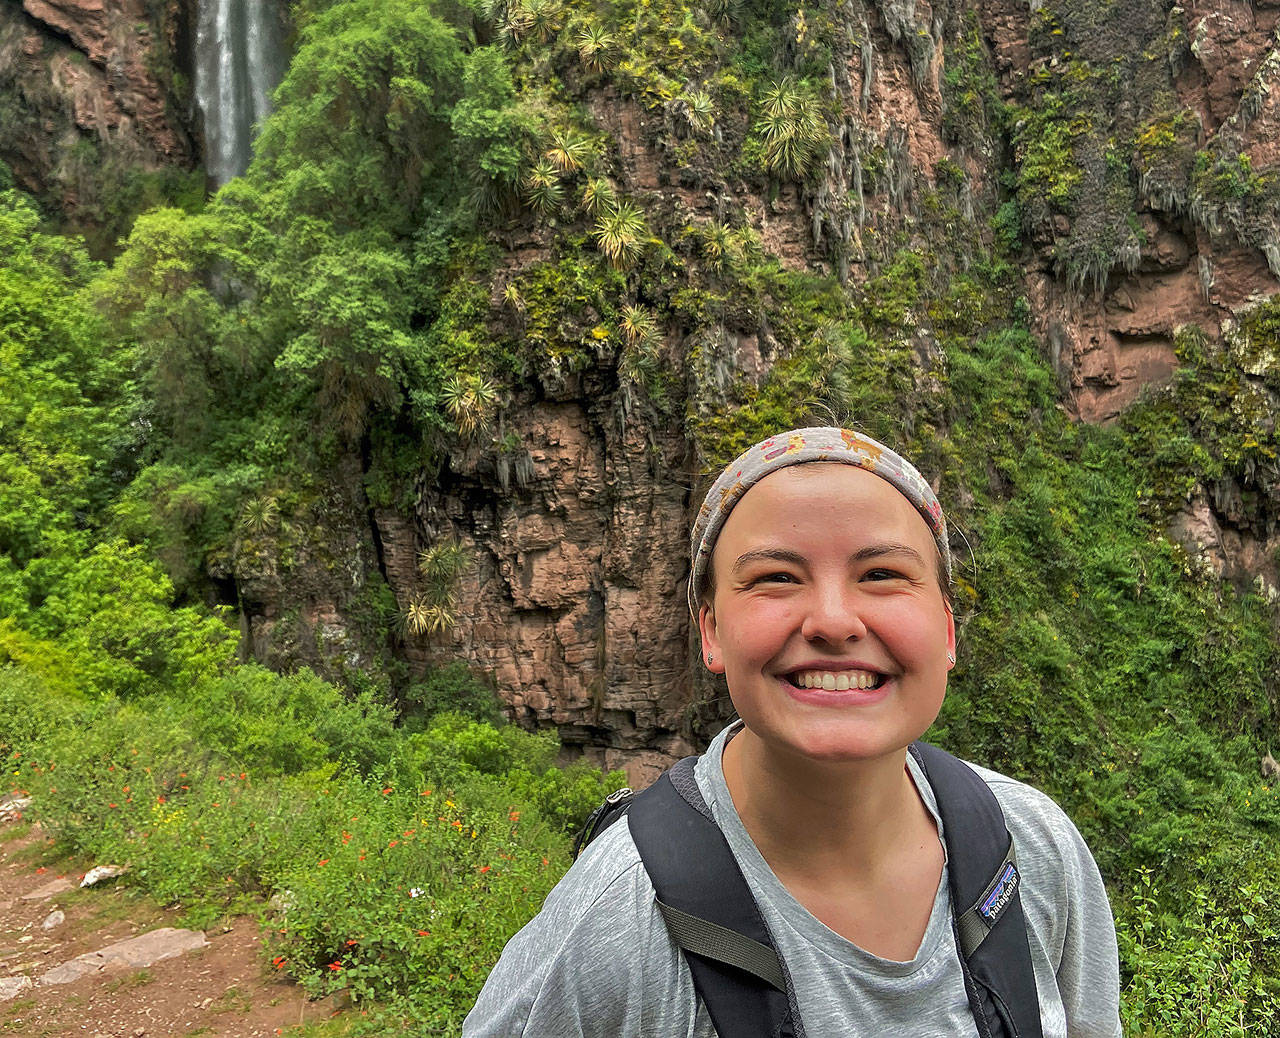 Caroline Overstreet during a hike to a waterfall in Peru. She was there serving with the Awamaki organization that serves Peruvian women. (Courtesy Caroline Overstreet)